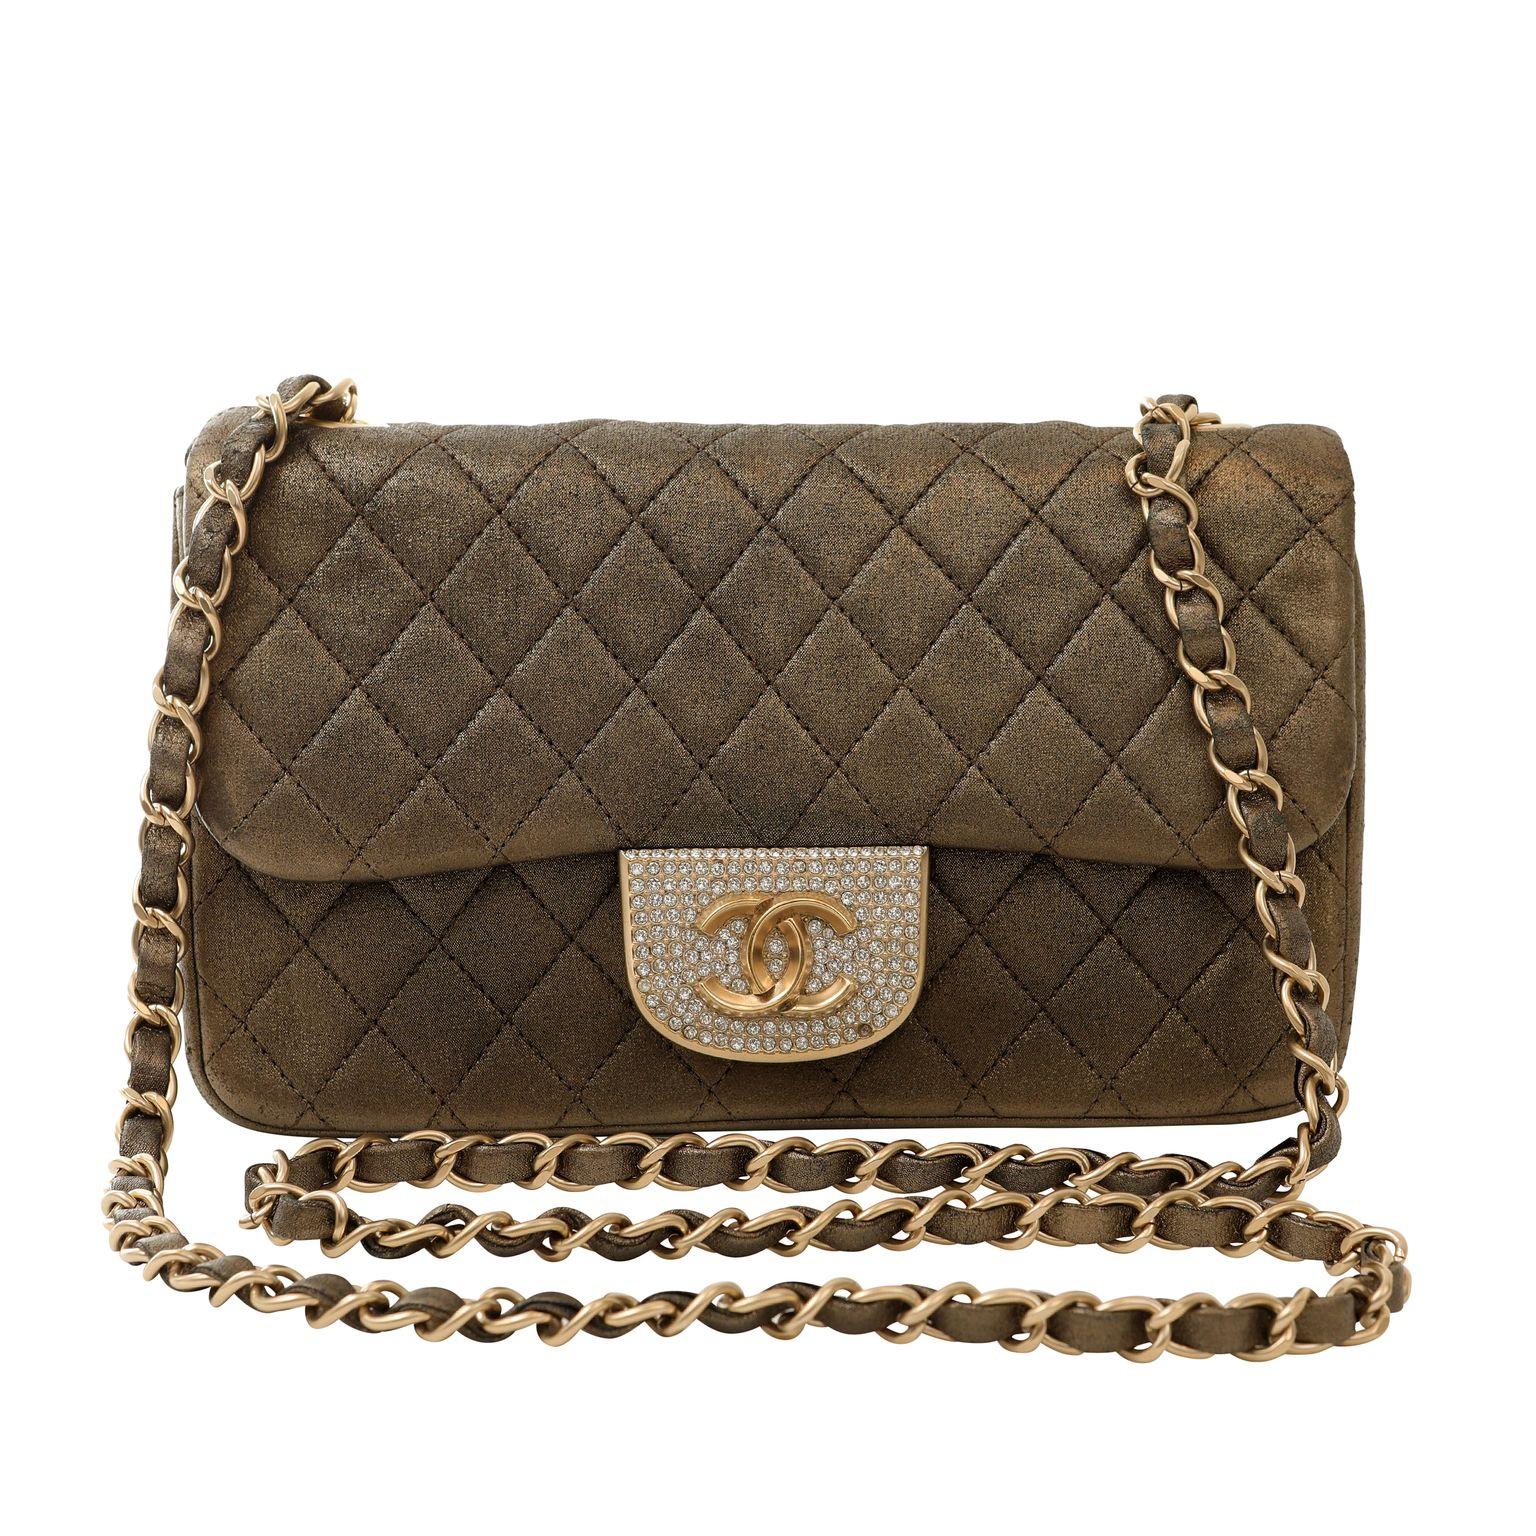 Chanel Metallic Black and Gold Crystal Flap Bag In Good Condition For Sale In Palm Beach, FL